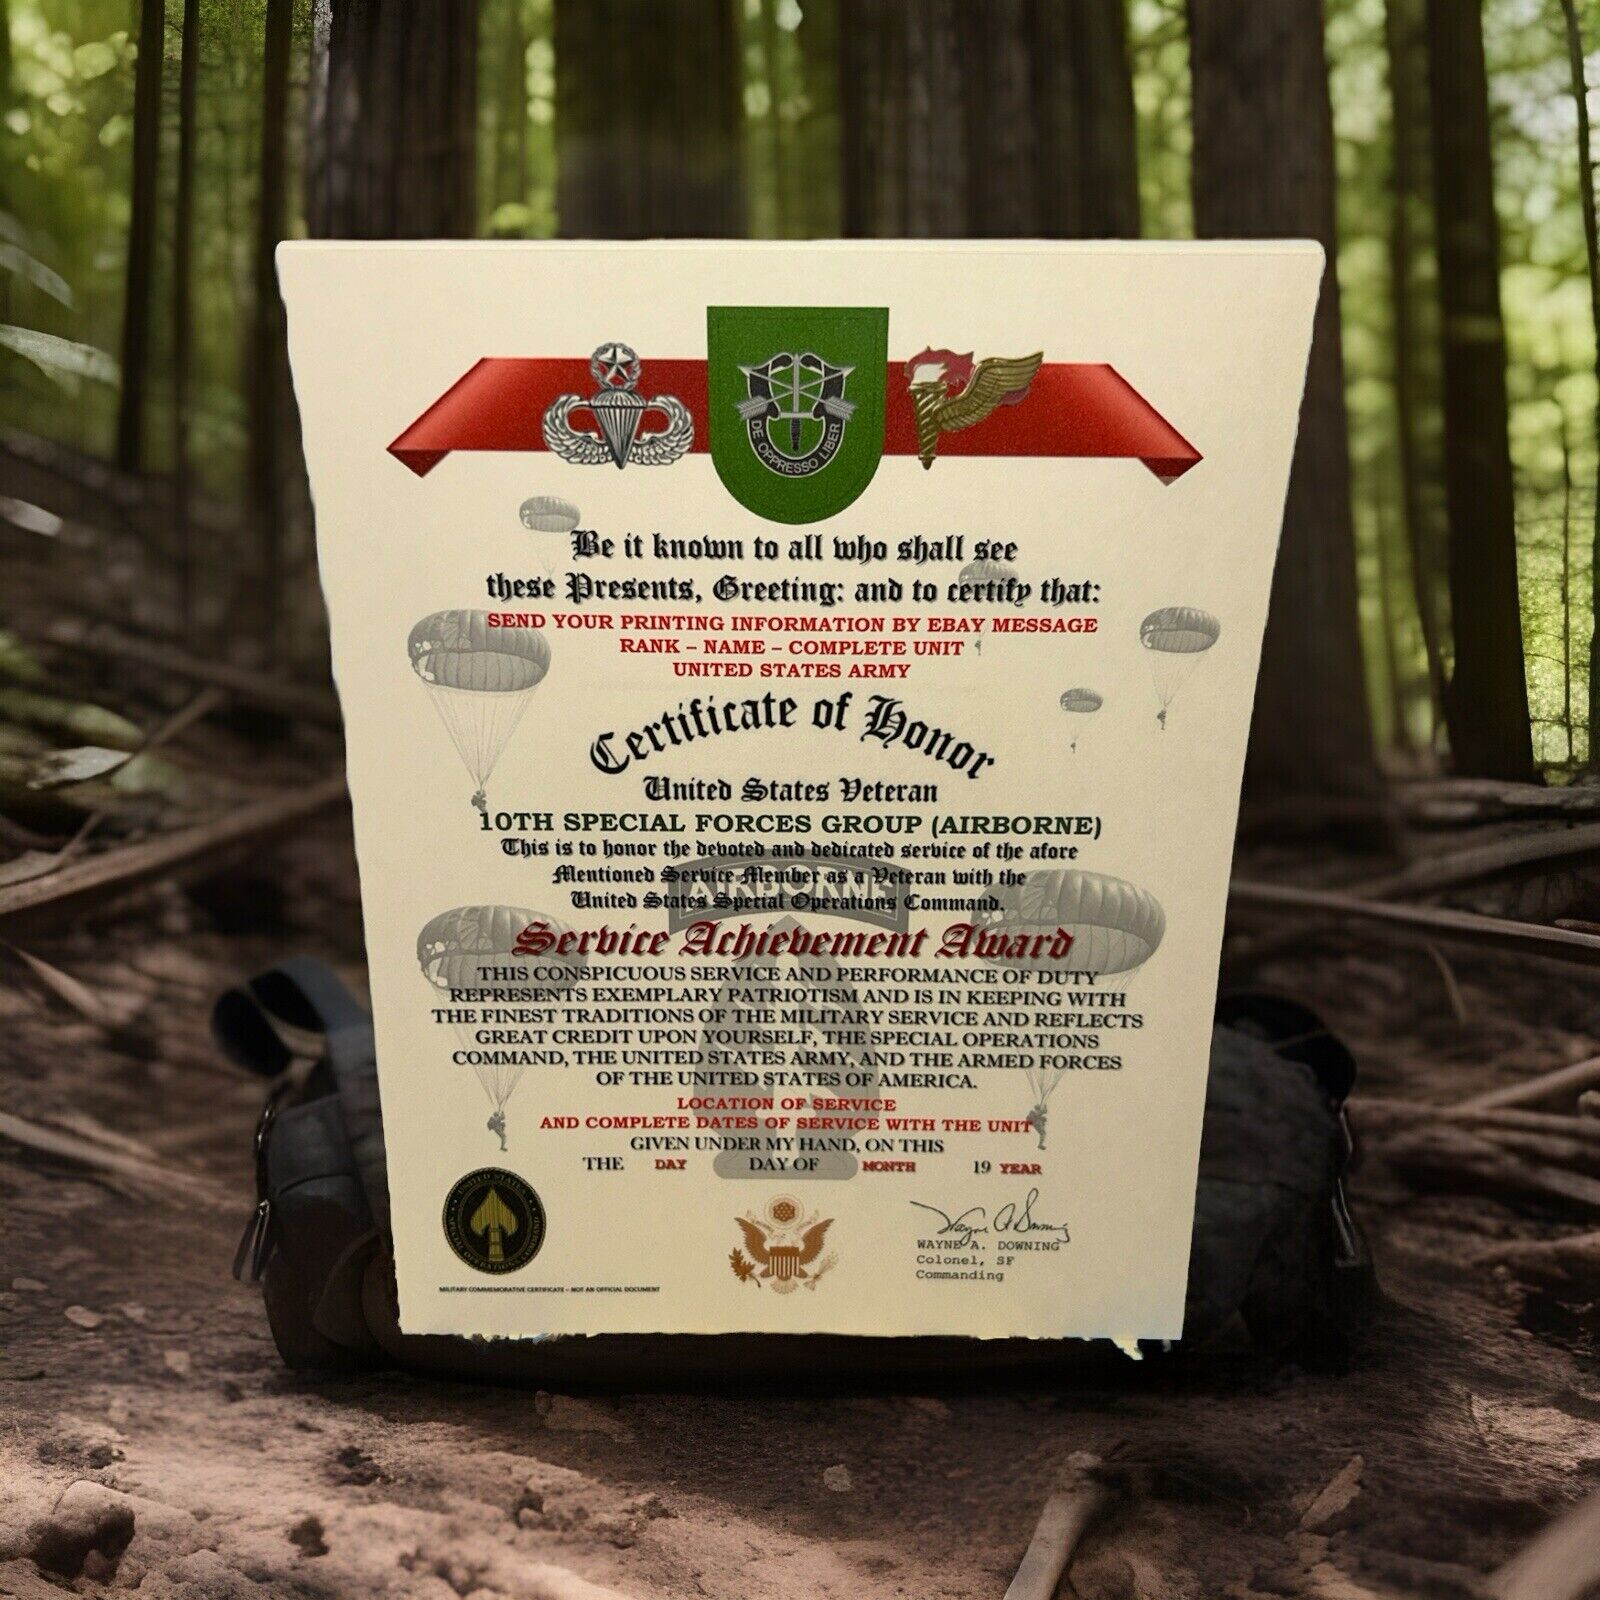 U.S. ARMY - 10TH SPECIAL FORCES GROUP (ABN) VETERAN SERVICE ACHIEVEMENT AWARD